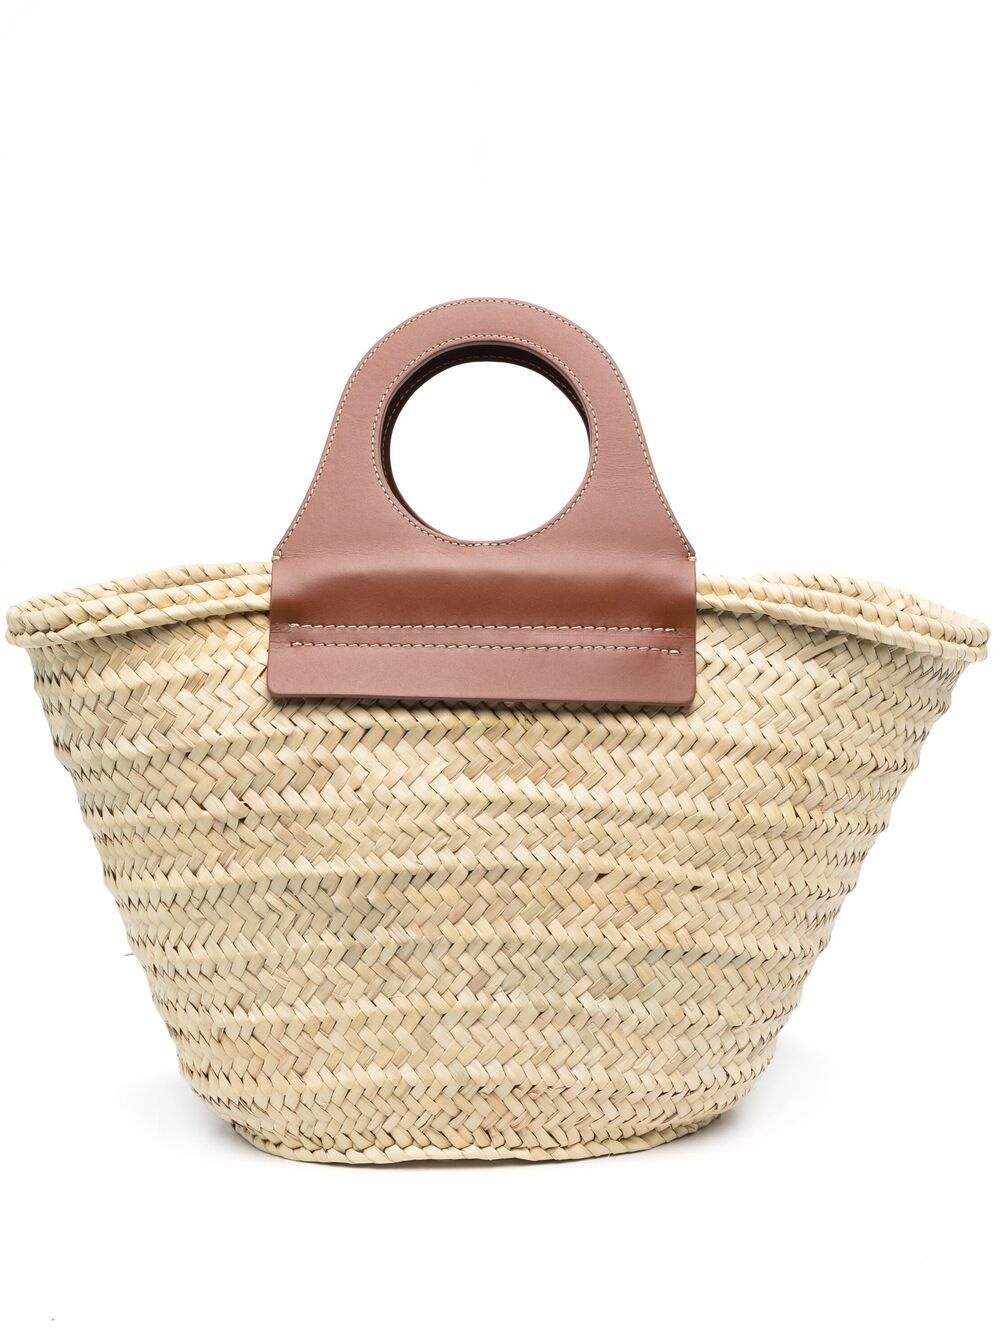 woven-straw tote bag - 1